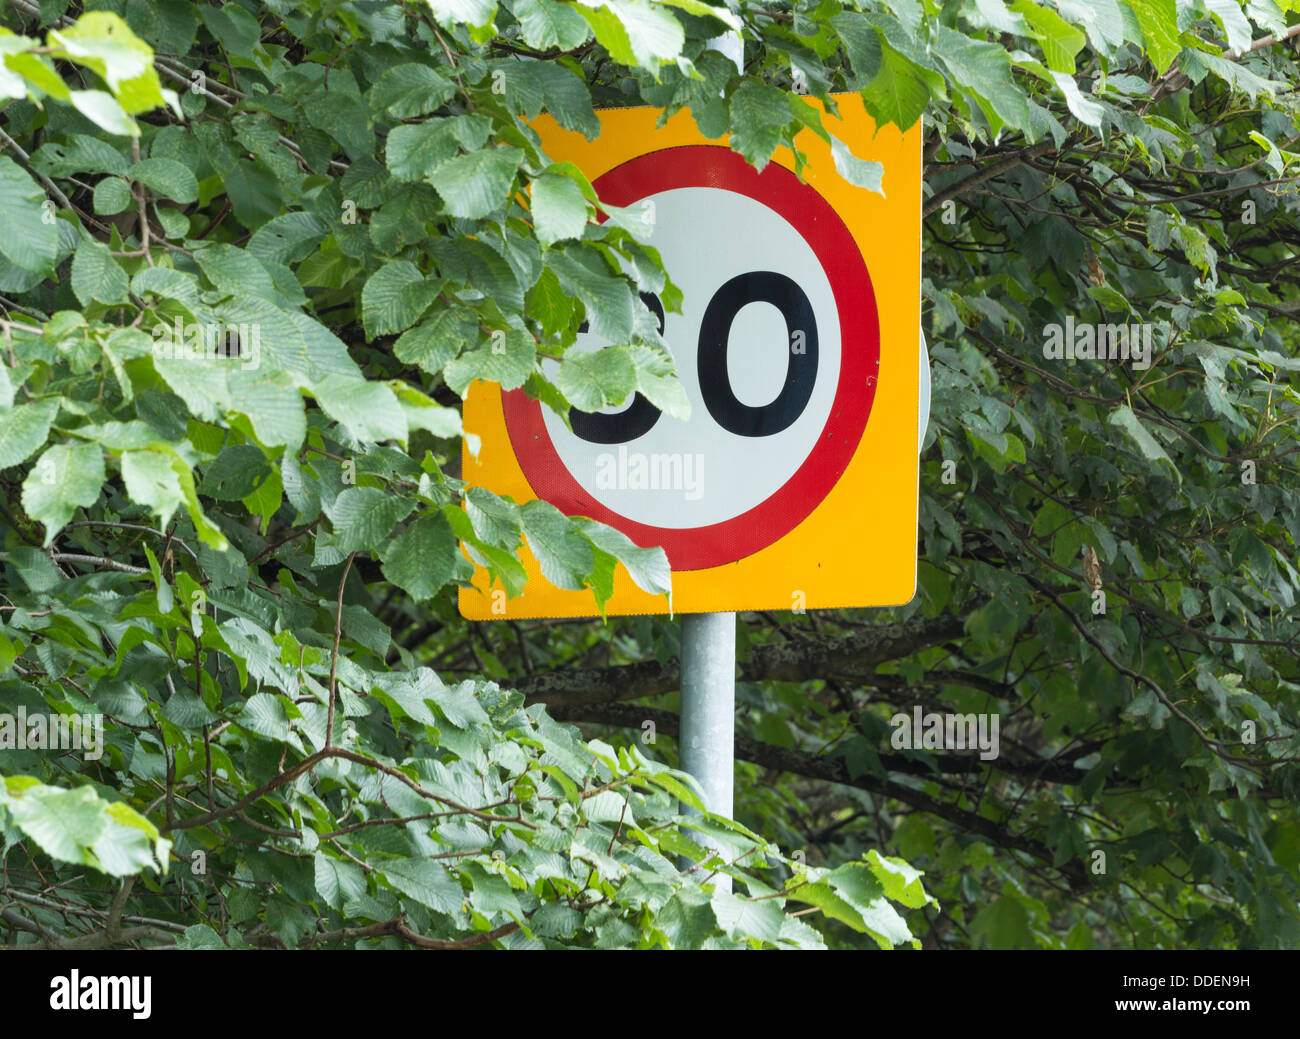 3O MPH limit sign obscured by tree branches. England, UK Stock Photo